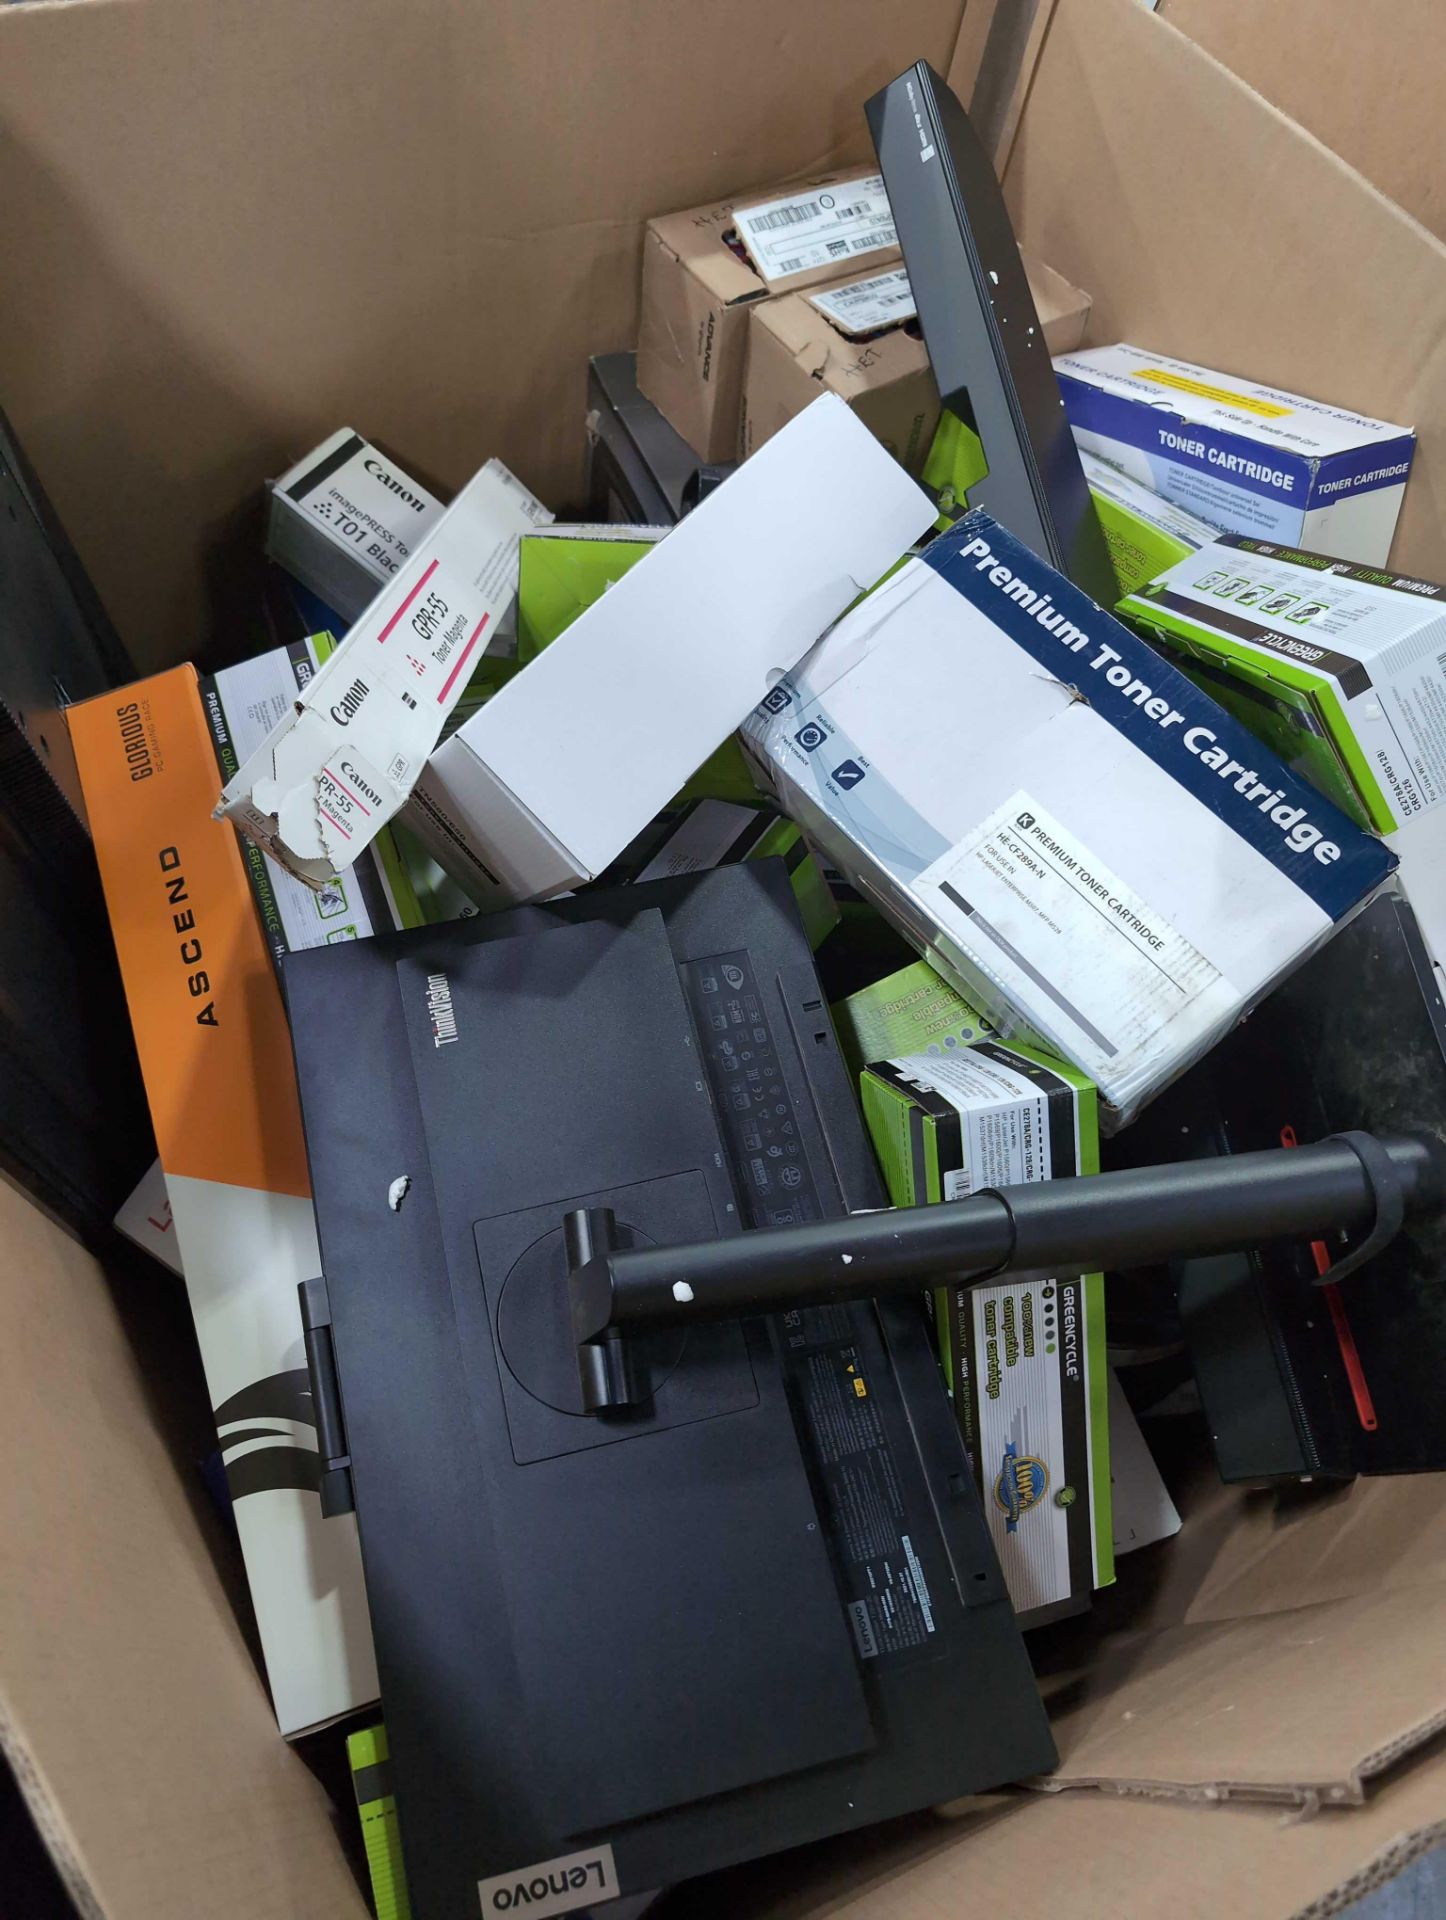 sleeve of electronics monitor, toners cartridges, air fryer and other electronic items - Image 10 of 15